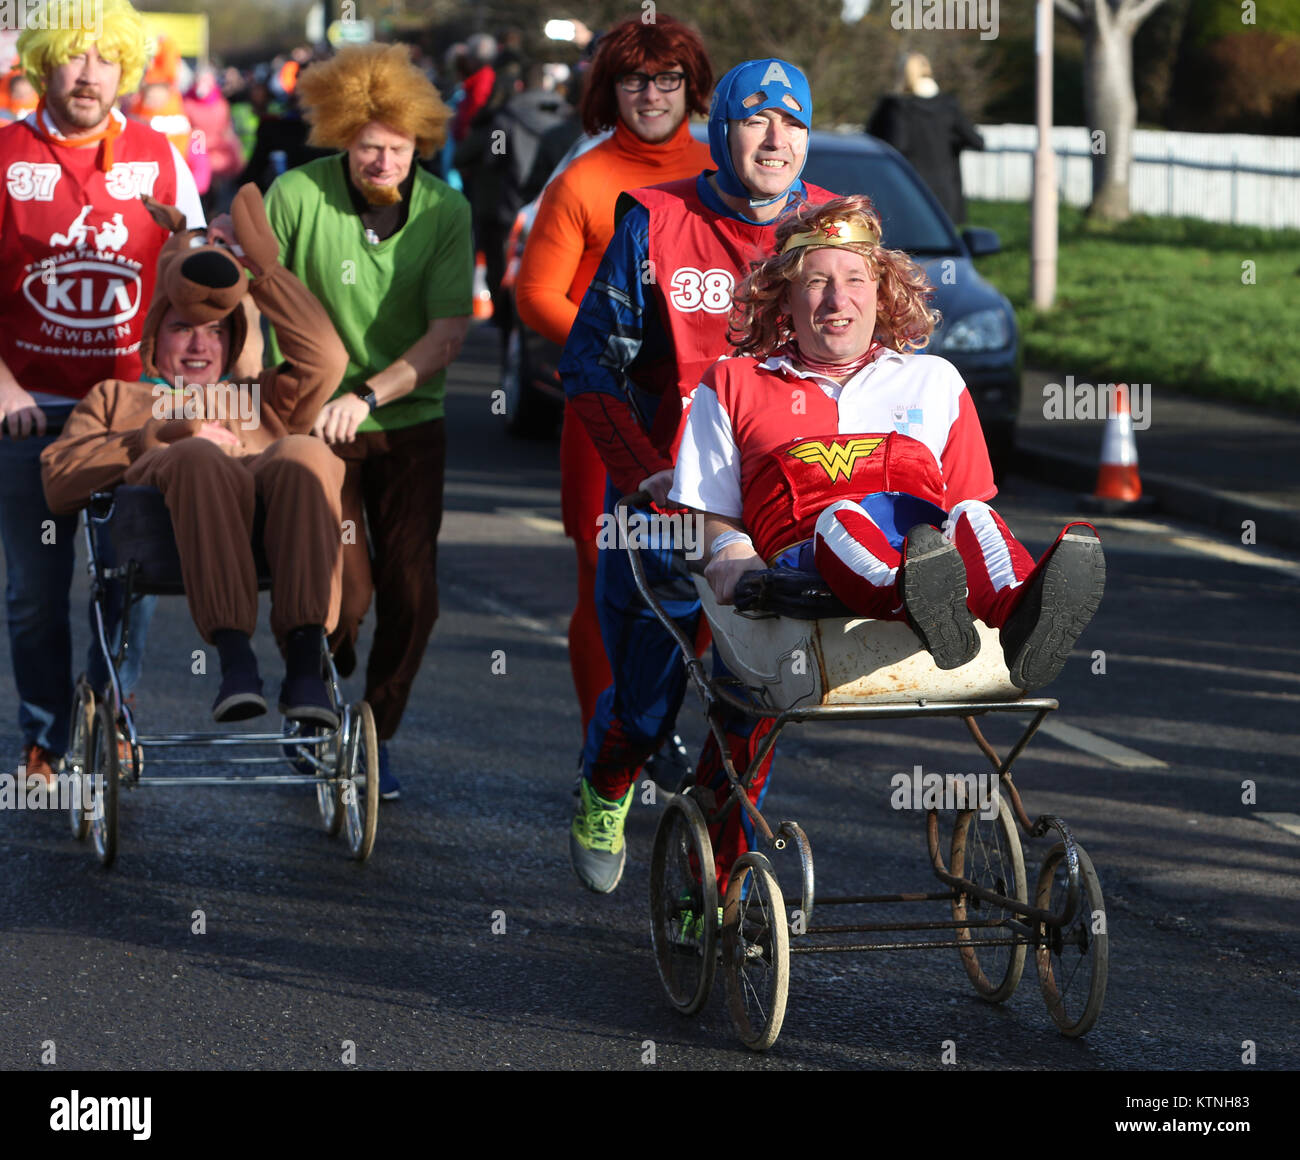 Pagham, UK. 26th Dec, 2017. Pagham, near Chichester, West Sussex, UK. The 2017 annual Pagham Pram Race. Pictured is action from the fun packed Boxing Day event. Tuesday 26th December 2017 Credit: Sam Stephenson/Alamy Live News Stock Photo